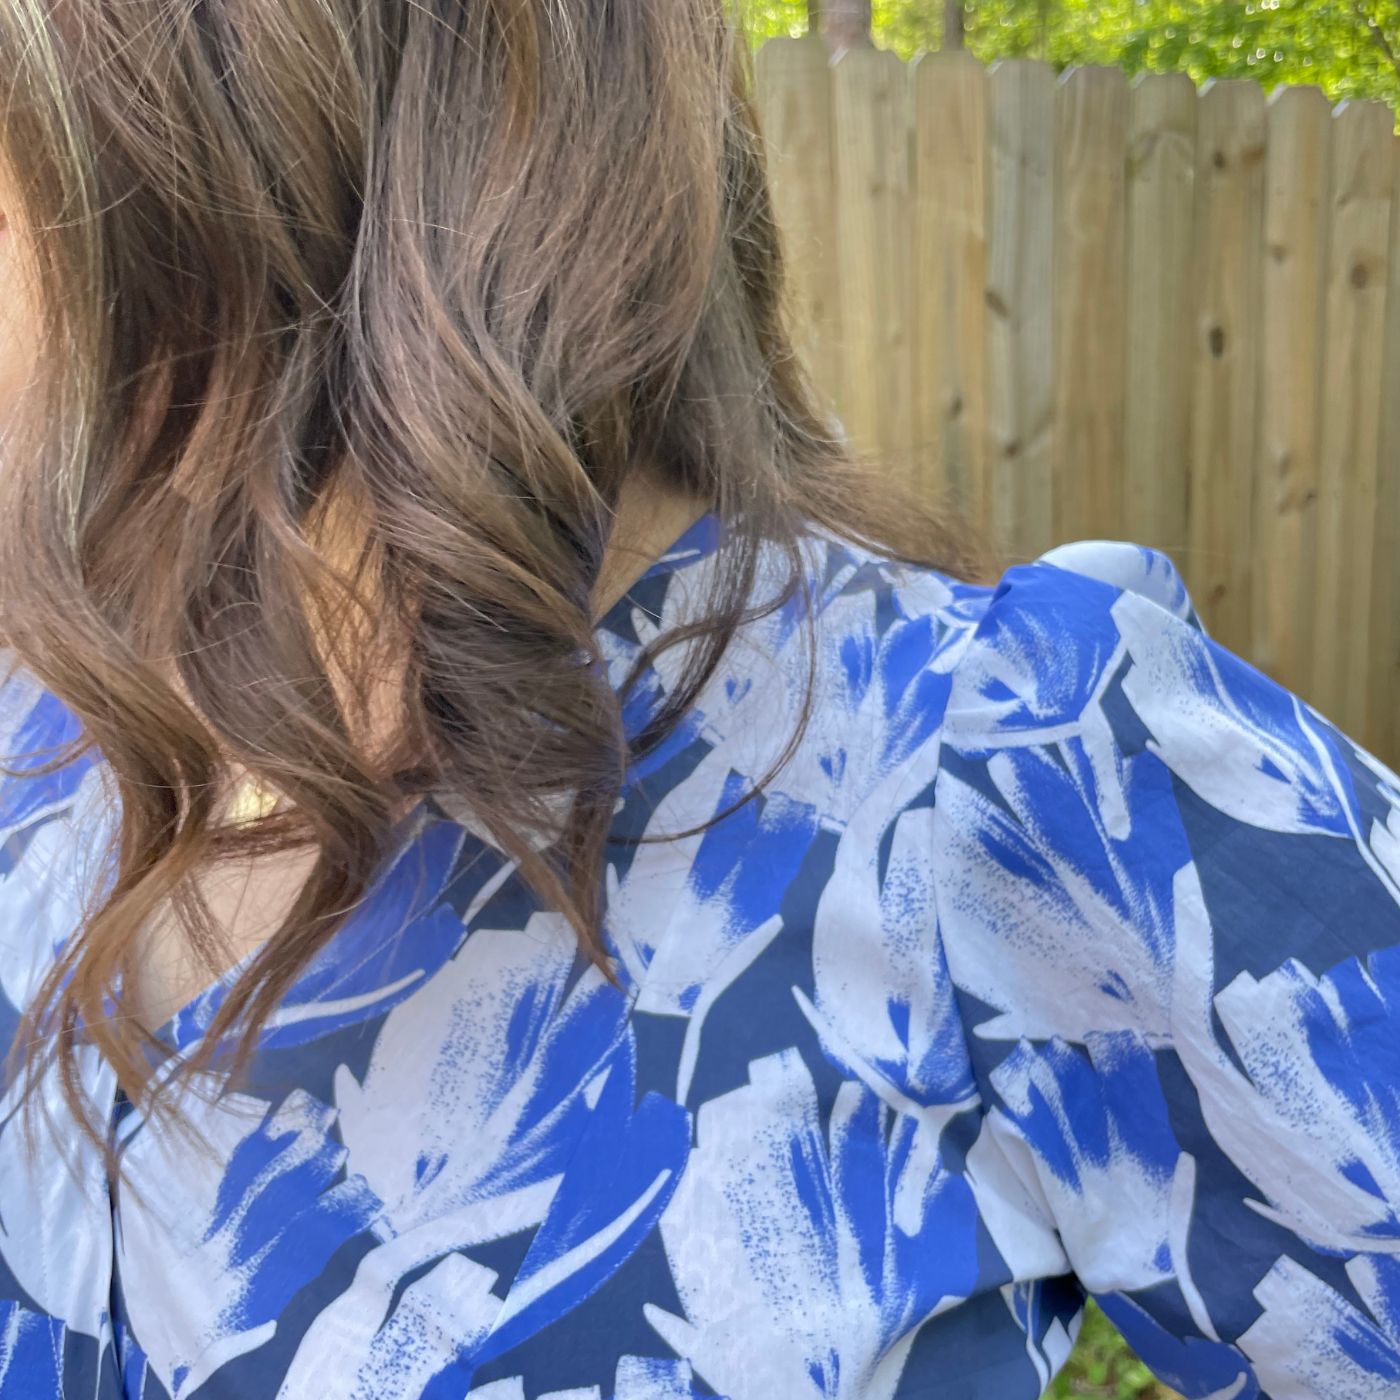 A close up of MaryAshlyn’s dress at the shoulder. The dress has repeating white and blue flowers on a navy background.